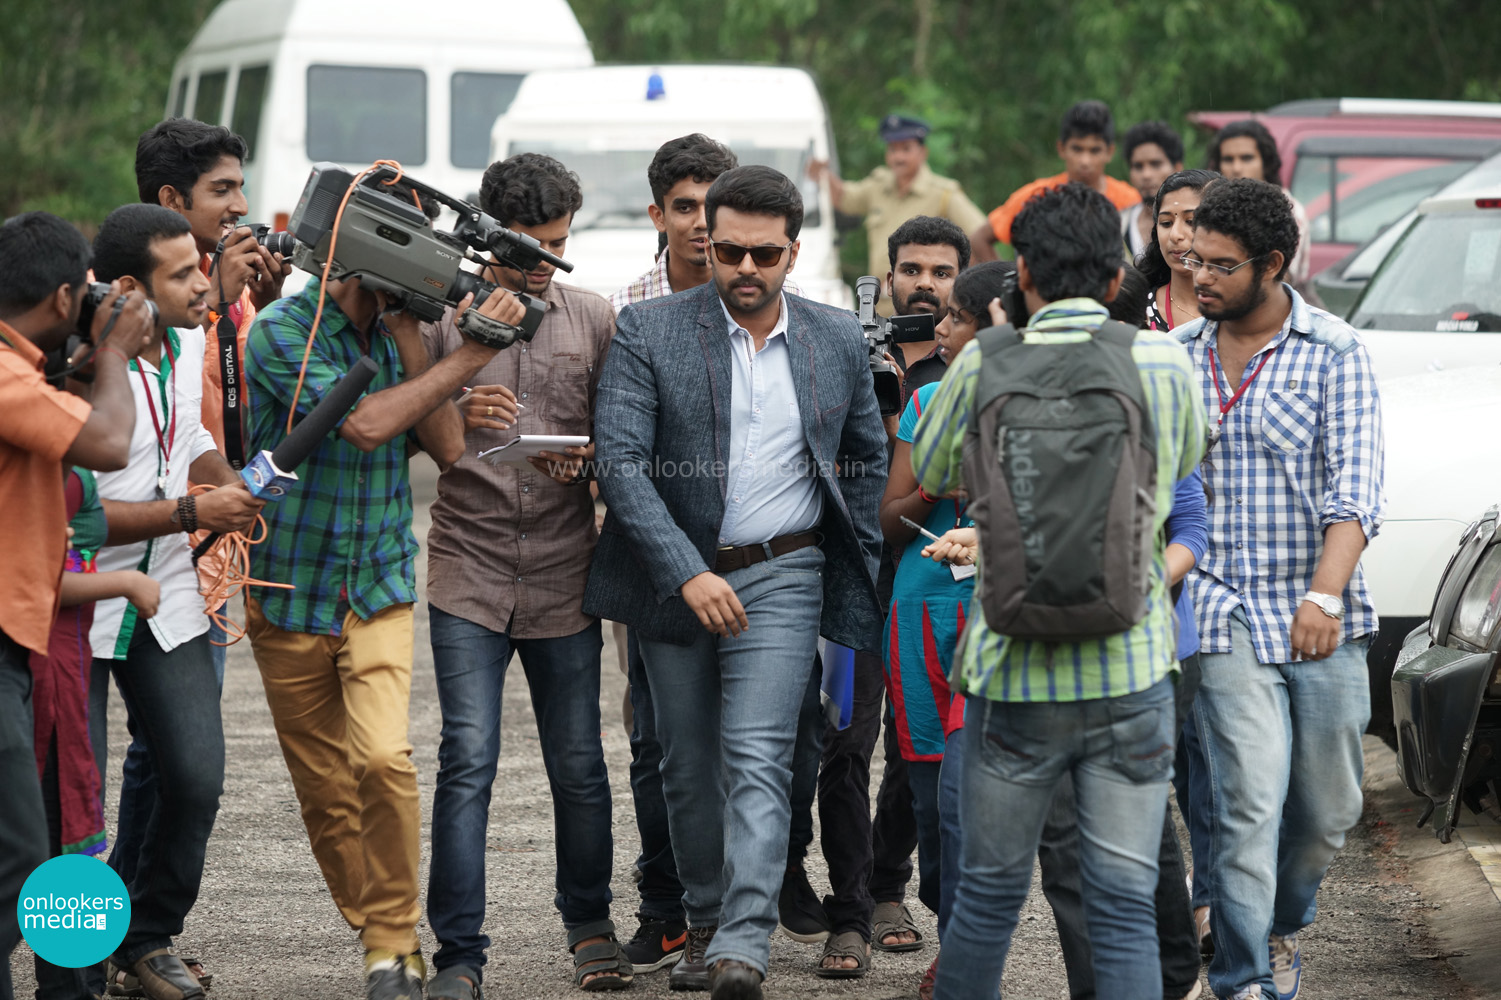 Indrajith In Angels Malayalam Movie Stills-Images-Photos-2014-Onlookers Media